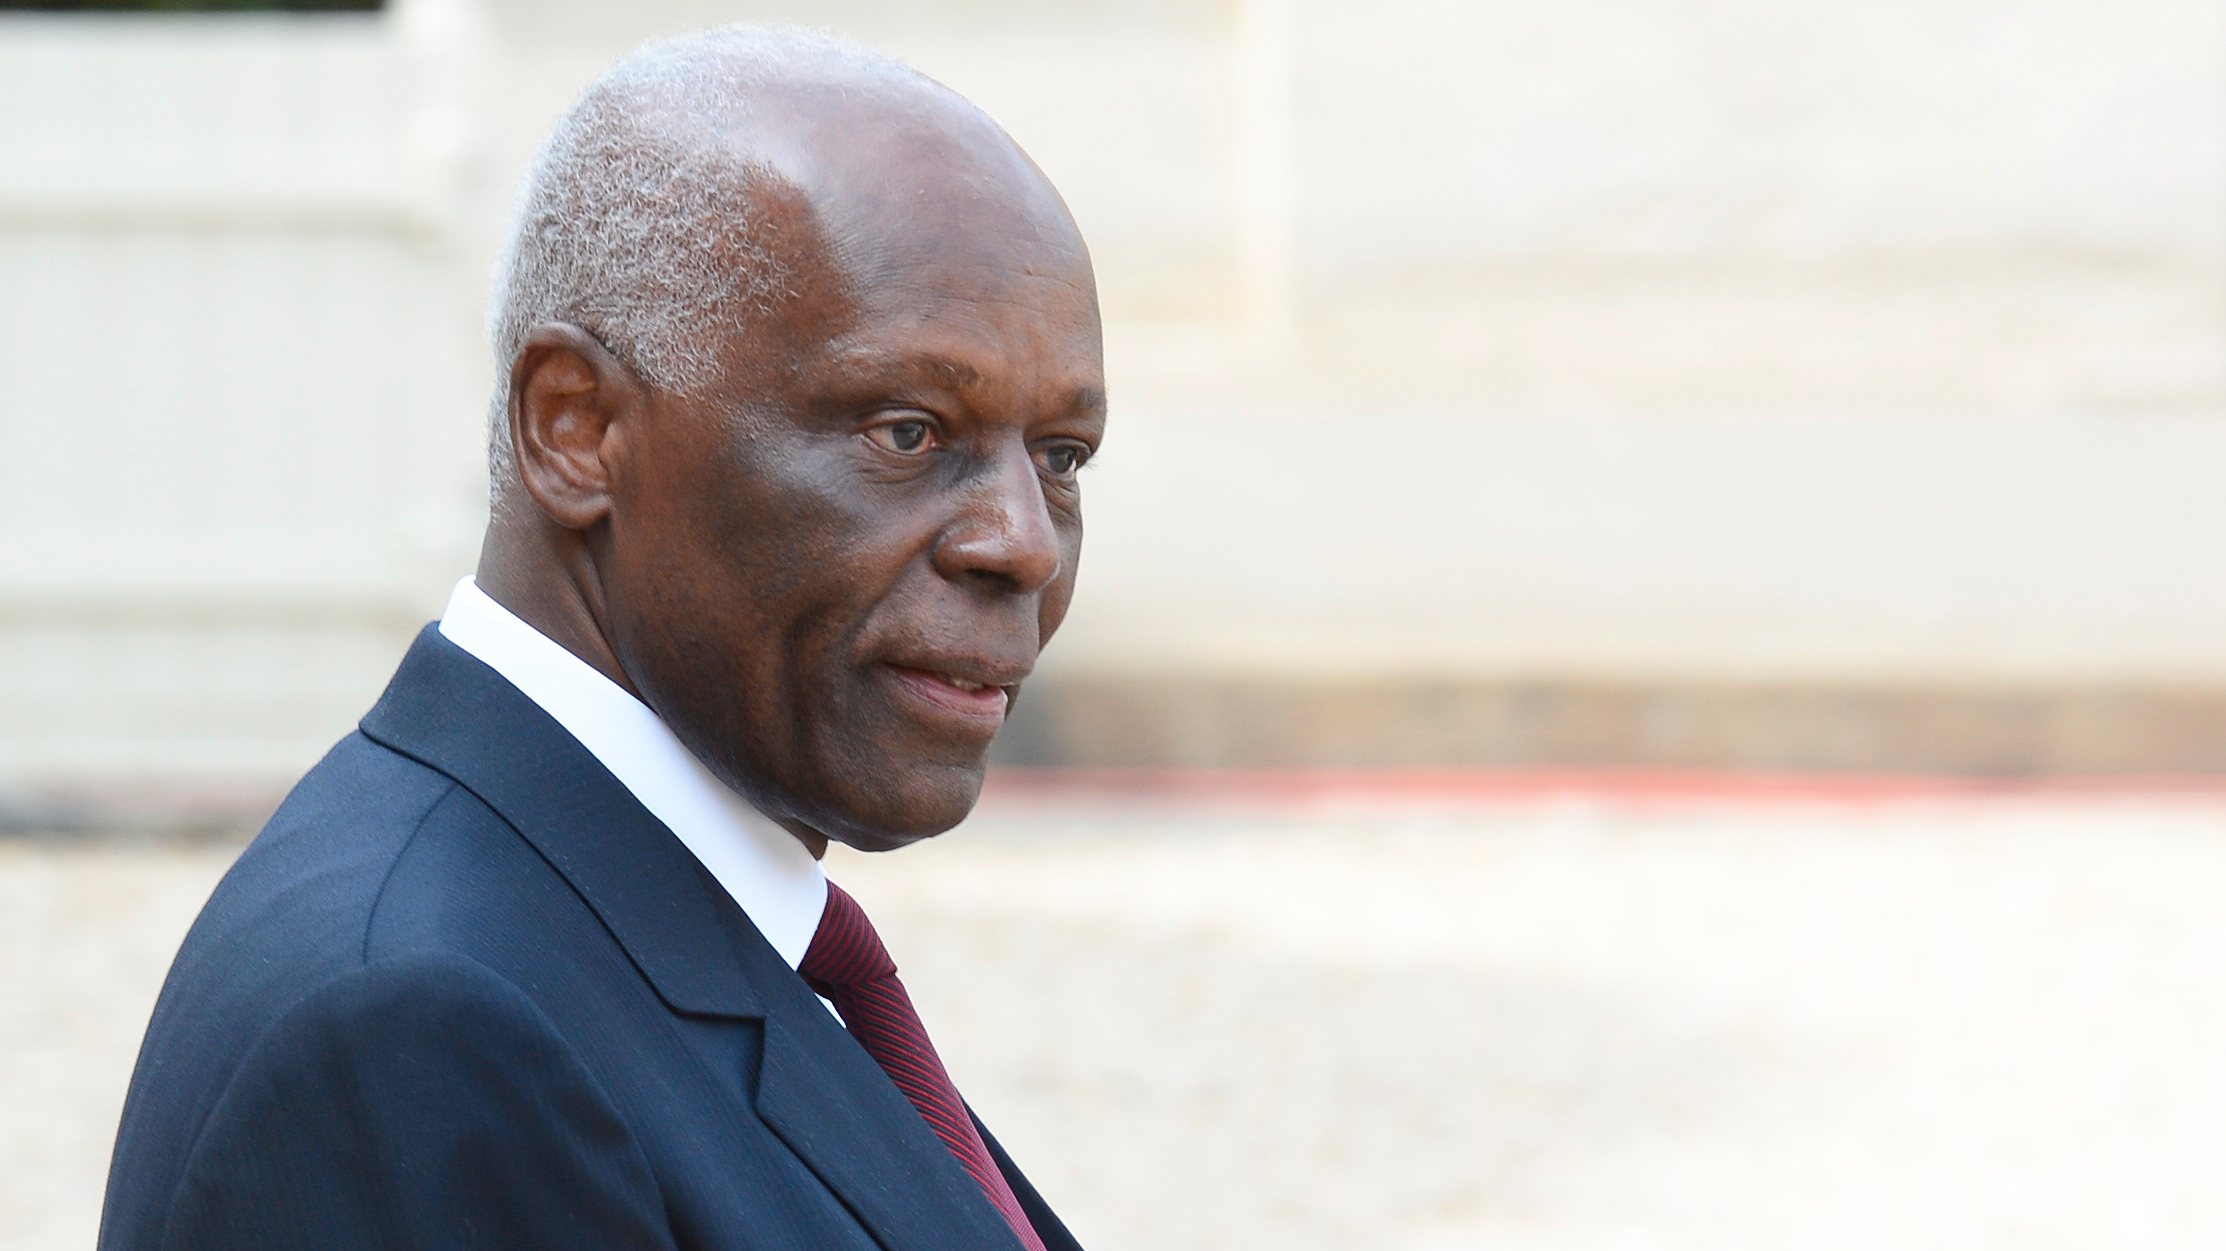 Angola President meets with President Hollande